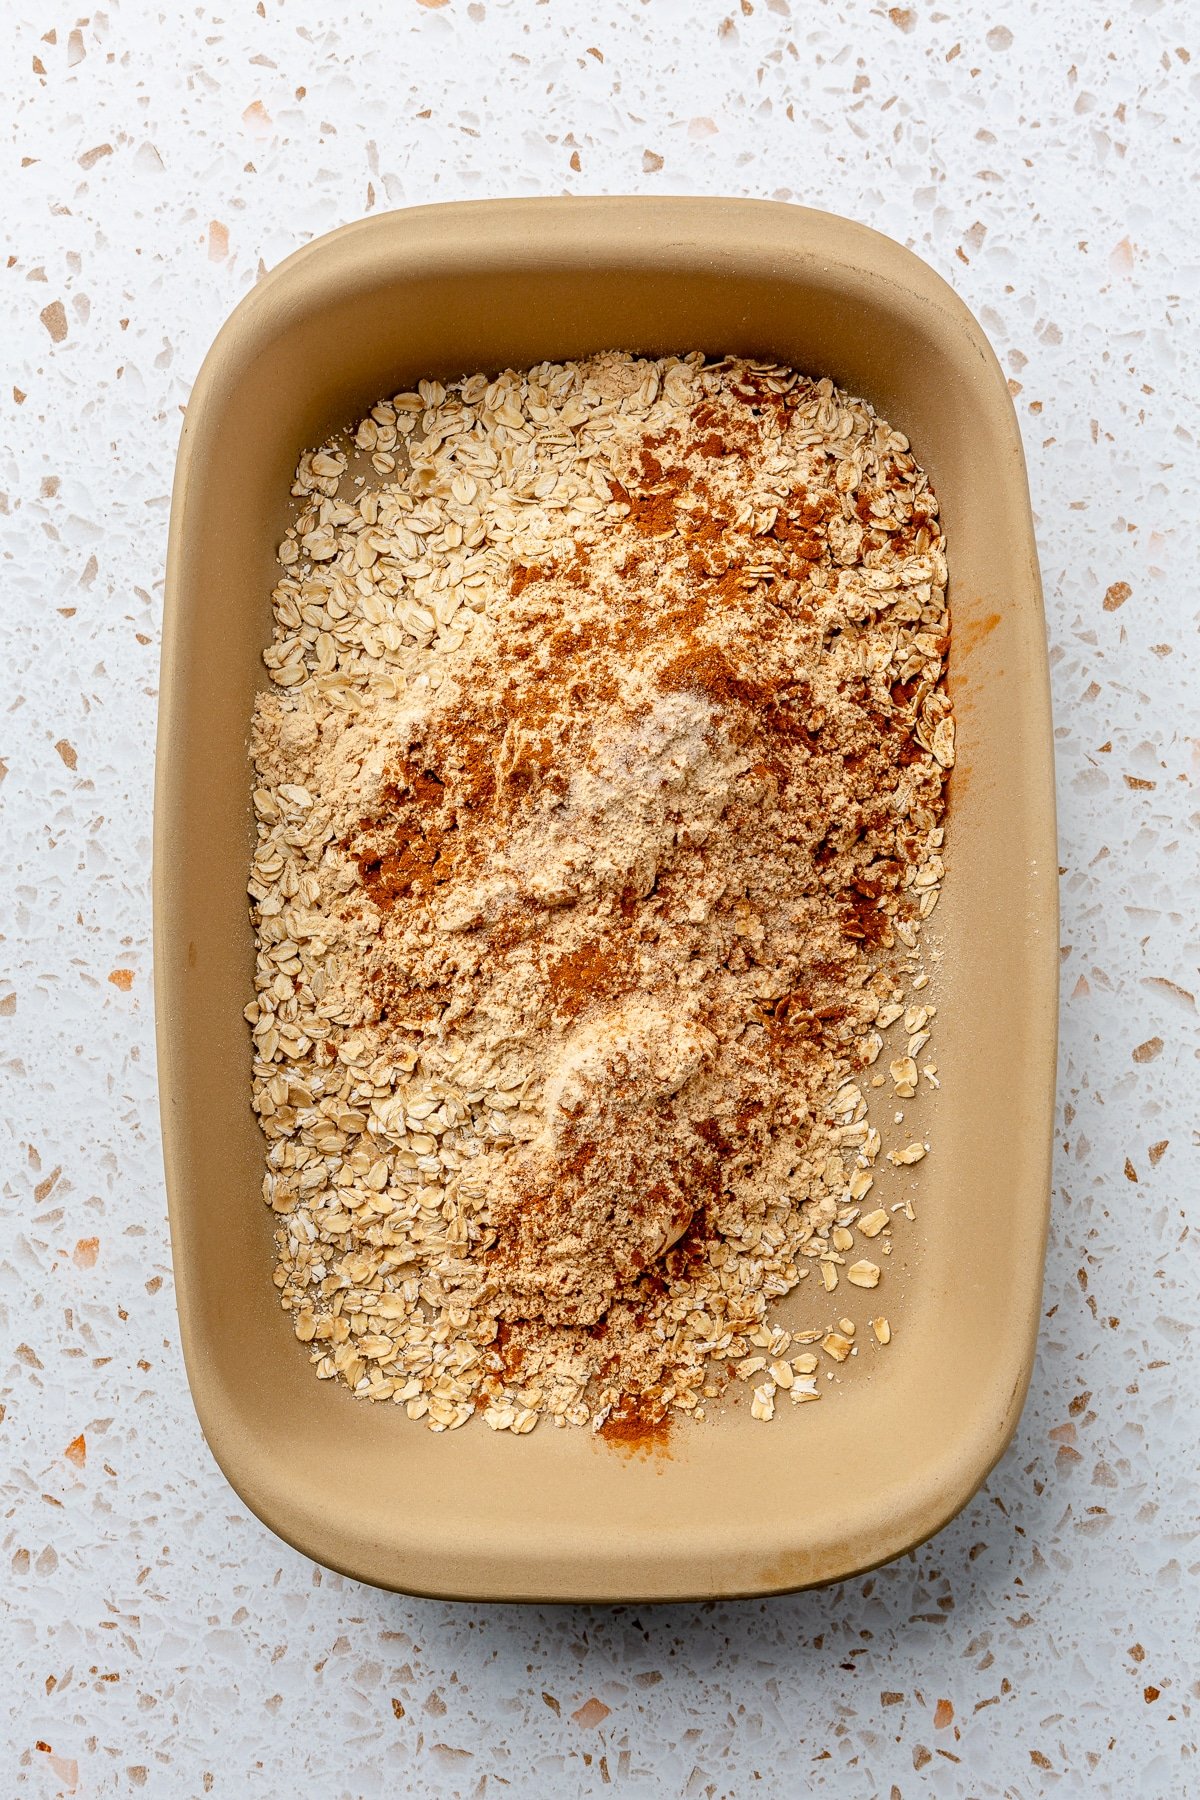 A variety of dry ingredients have been added to a beige-colored baking dish.